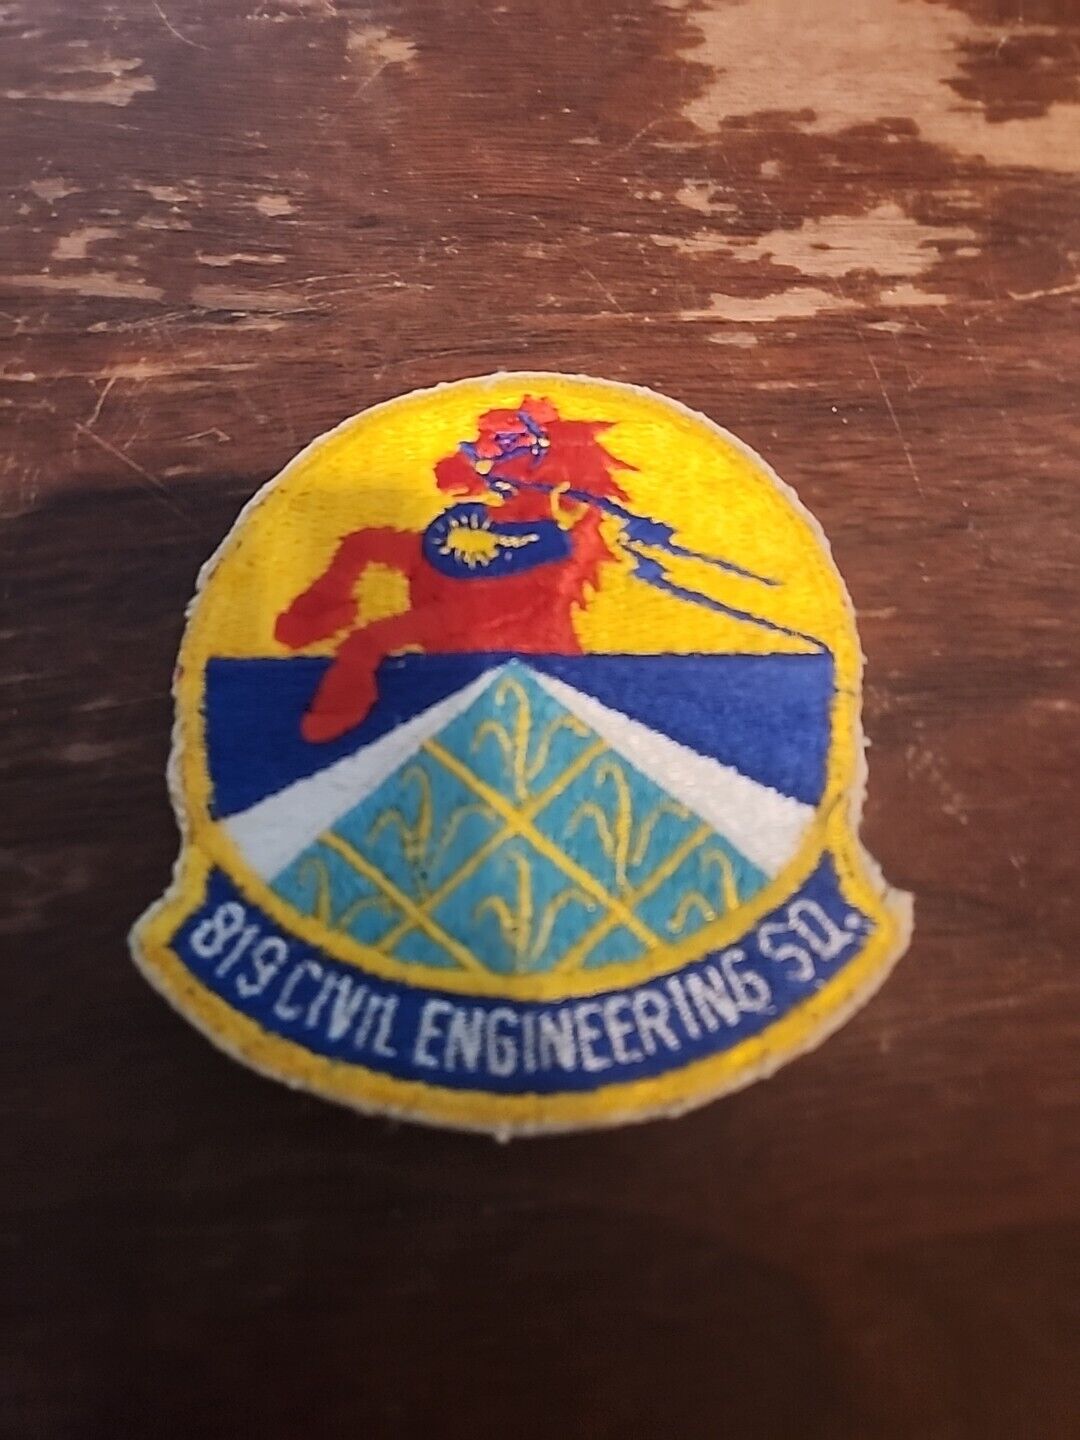 ORIGINAL 819 Civil Engineering SO. Patch Old Used